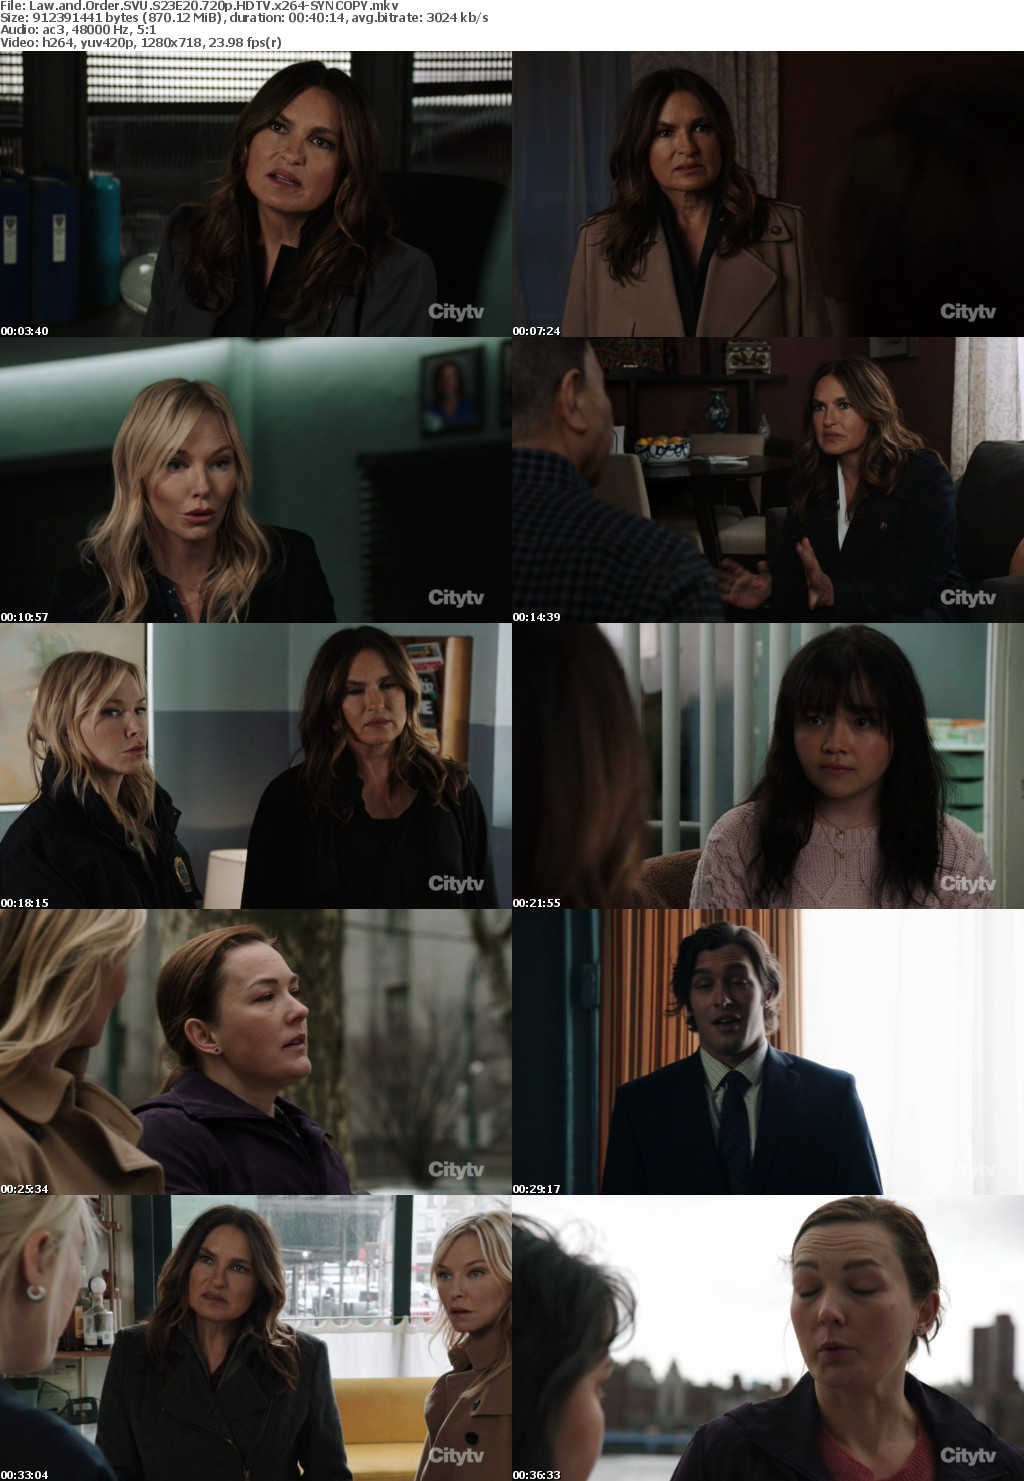 Law and Order SVU S23E20 720p HDTV x264-SYNCOPY